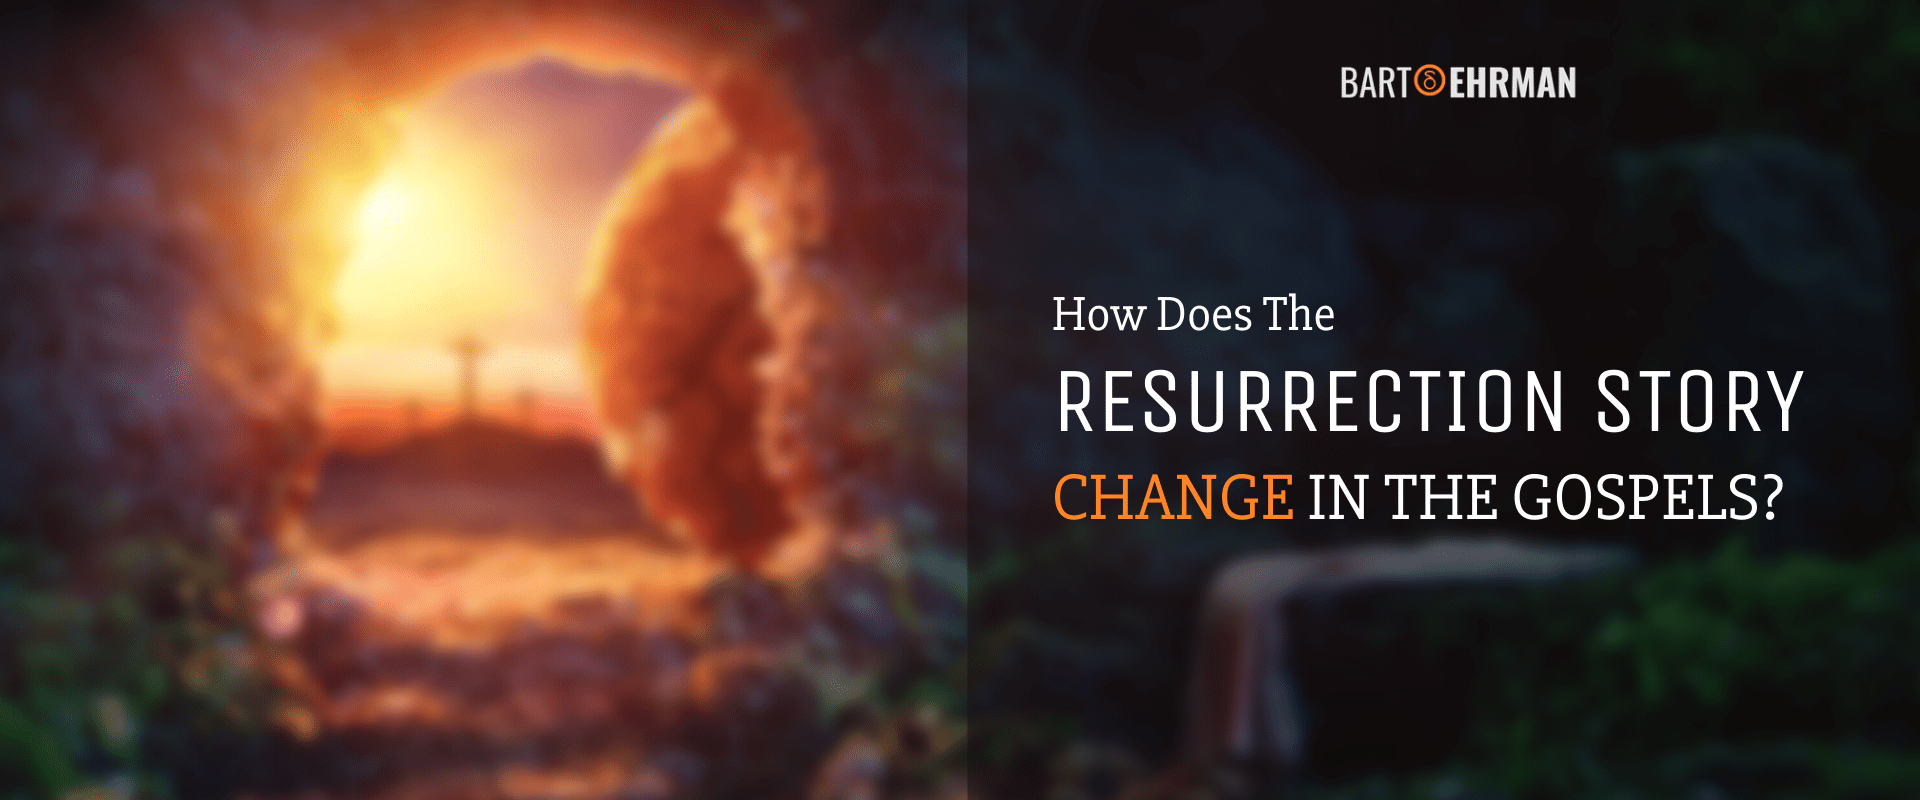 How does the resurrection story change in the gospels